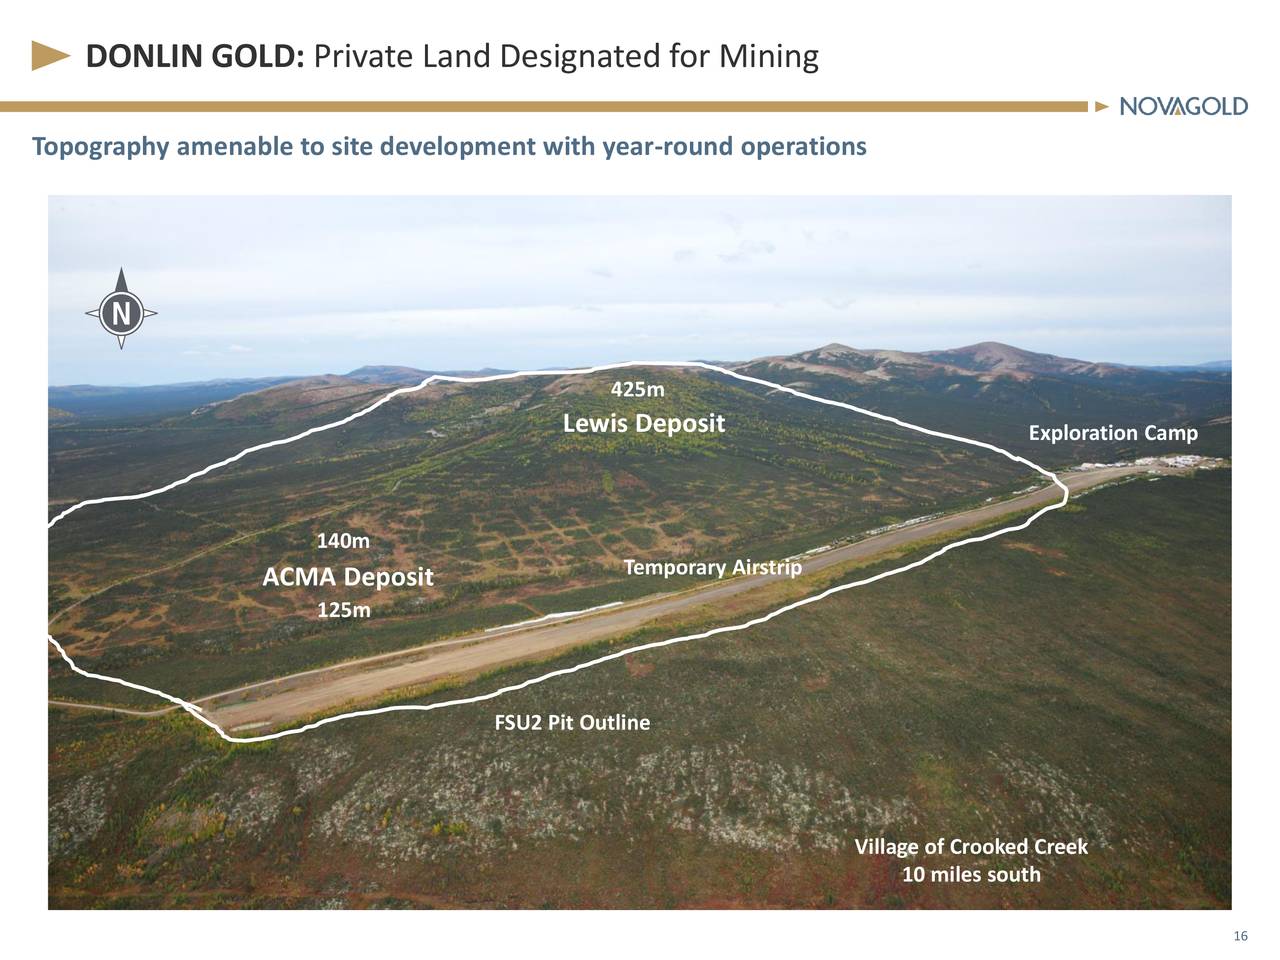 DONLIN GOLD: Private Land Designated for Mining